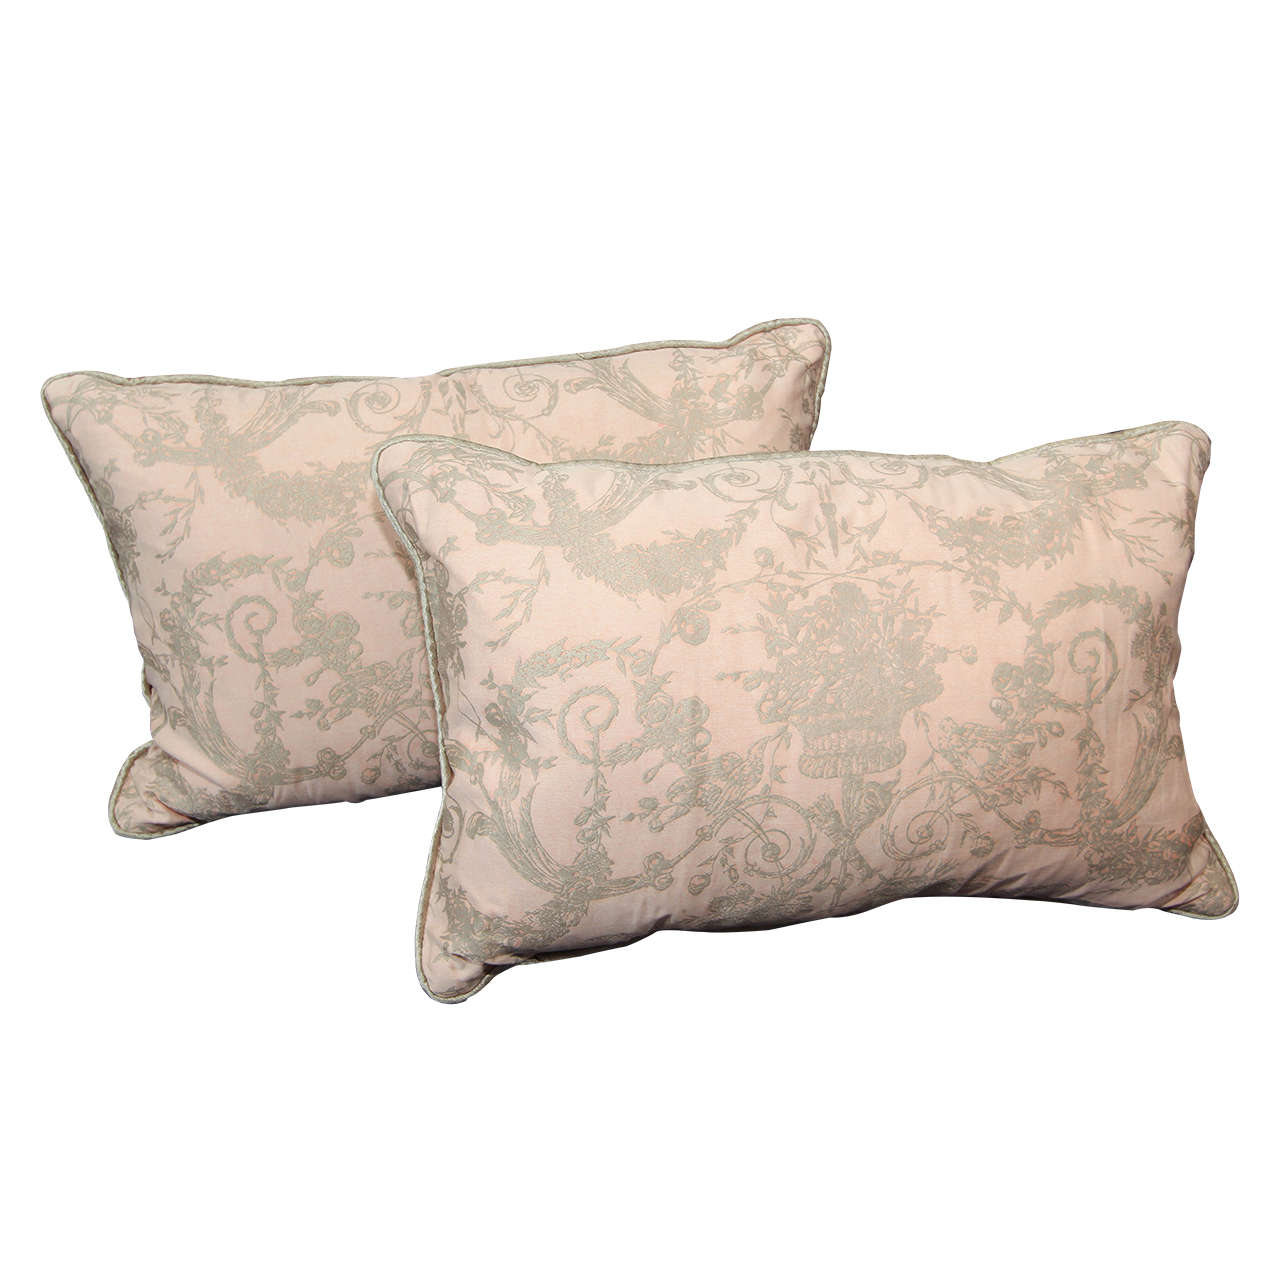 Pale Pink Fortuny Pillows